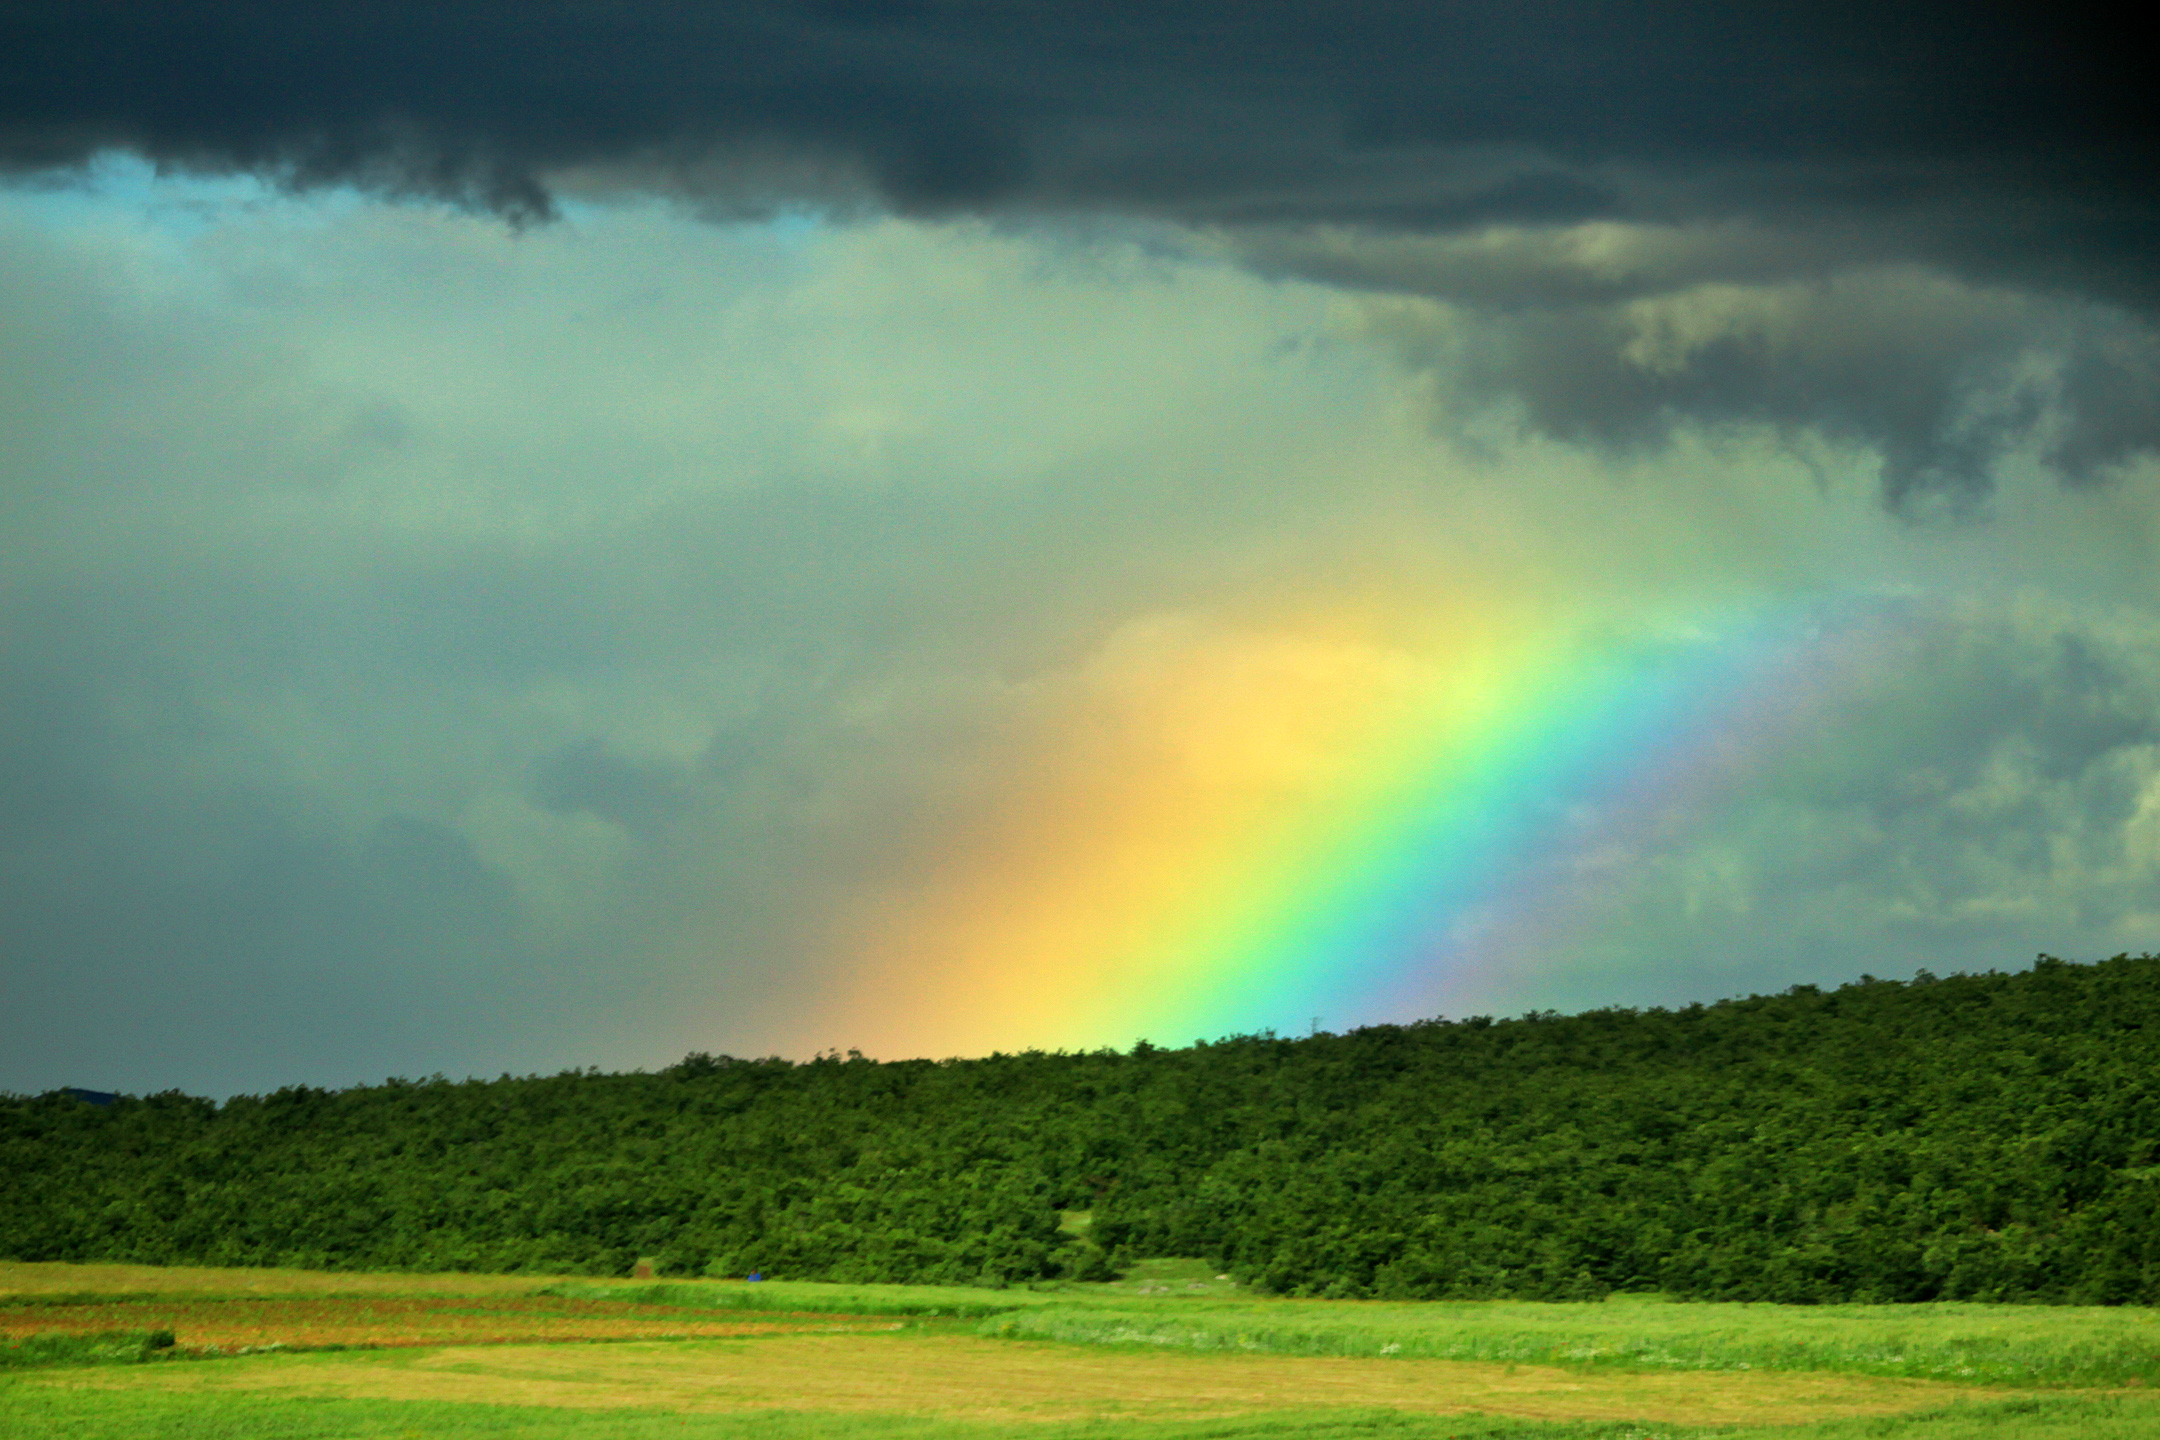 File:Rainbow after storm.jpg - Wikimedia Commons